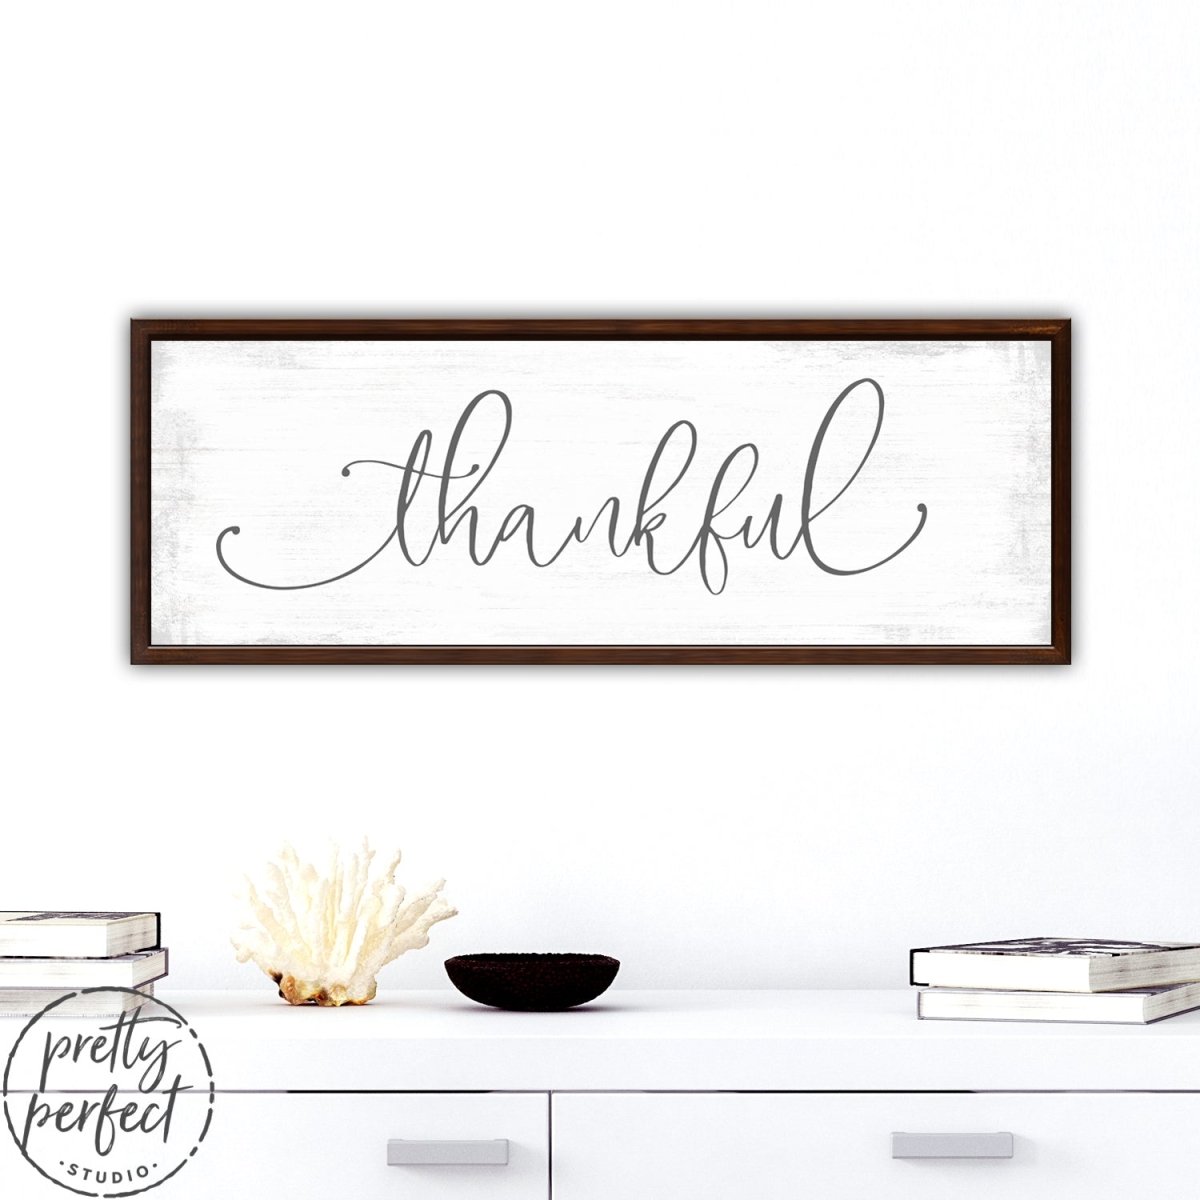 Thankful Rustic Farmhouse Sign in Family Room Above Couch - Pretty Perfect Studio